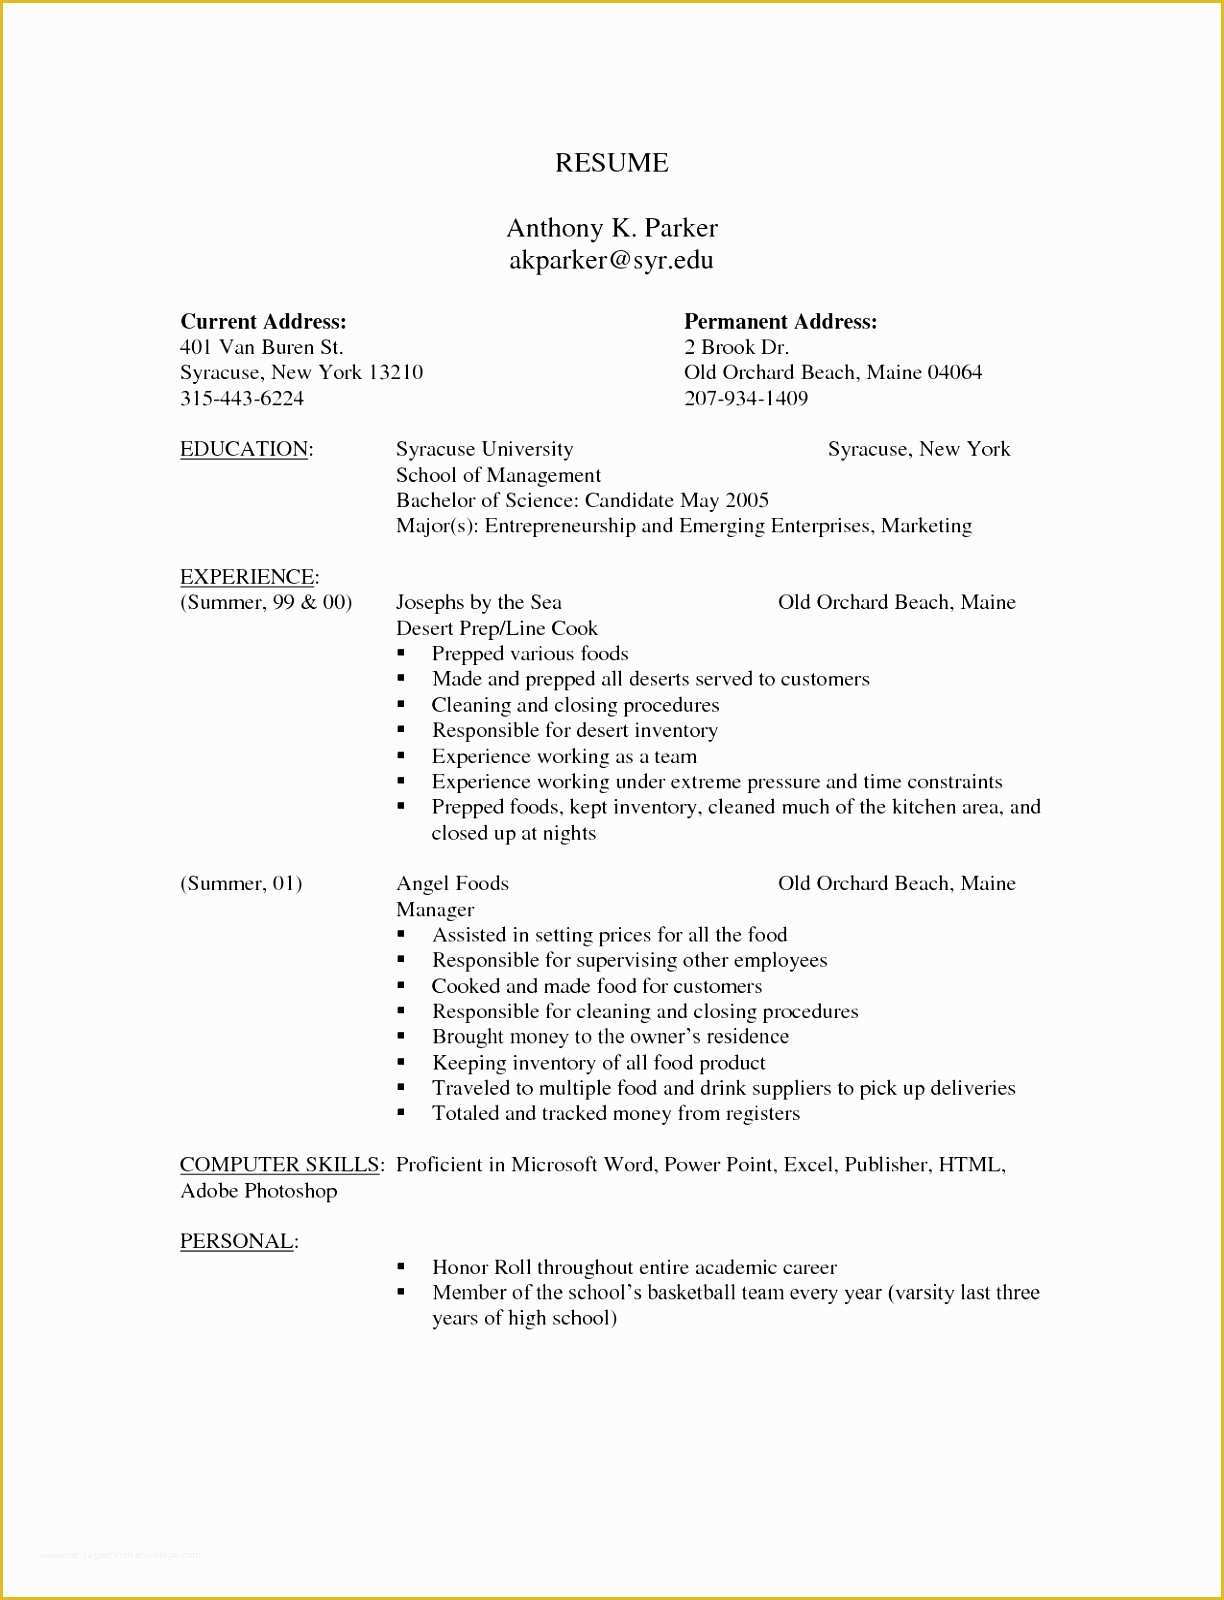 Free Resume Letter Templates Of 10 Free Printable Fill In the Blank Resume Templates Laioa